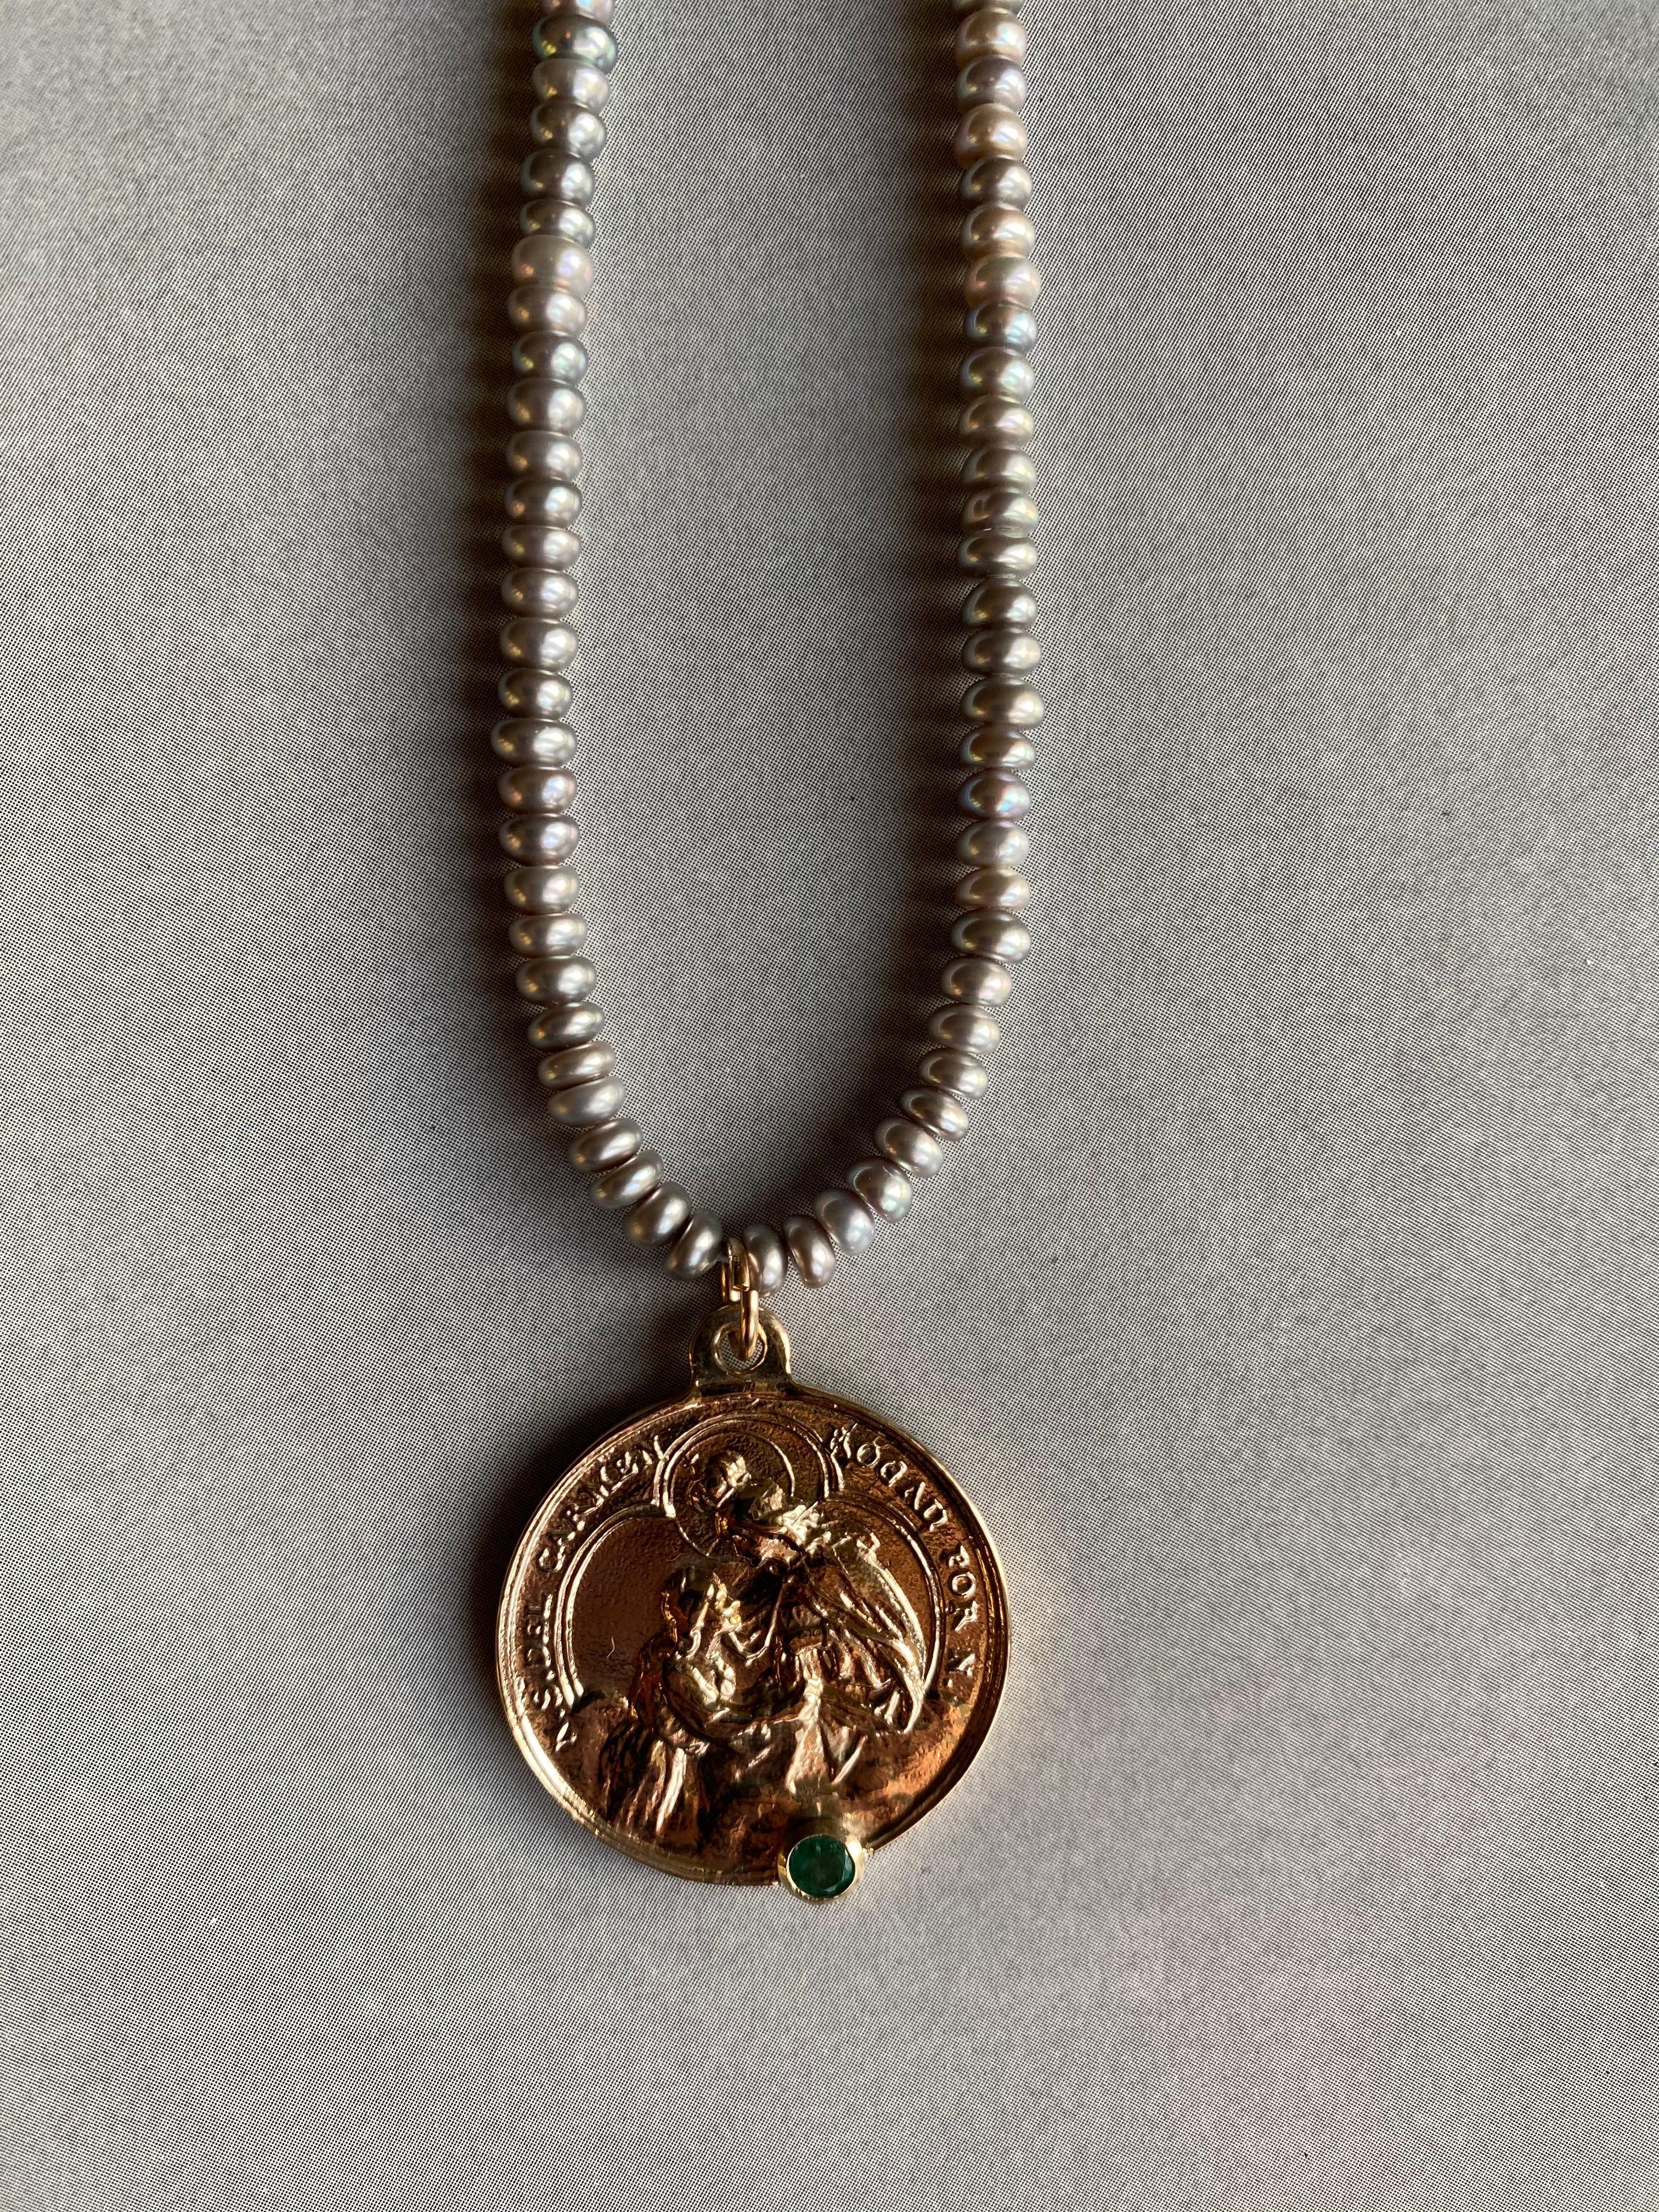 Brilliant Cut Emerald Virgin Mary Bronze Grey Silver Sweet Water Pearl Bead Necklace J Dauphin For Sale